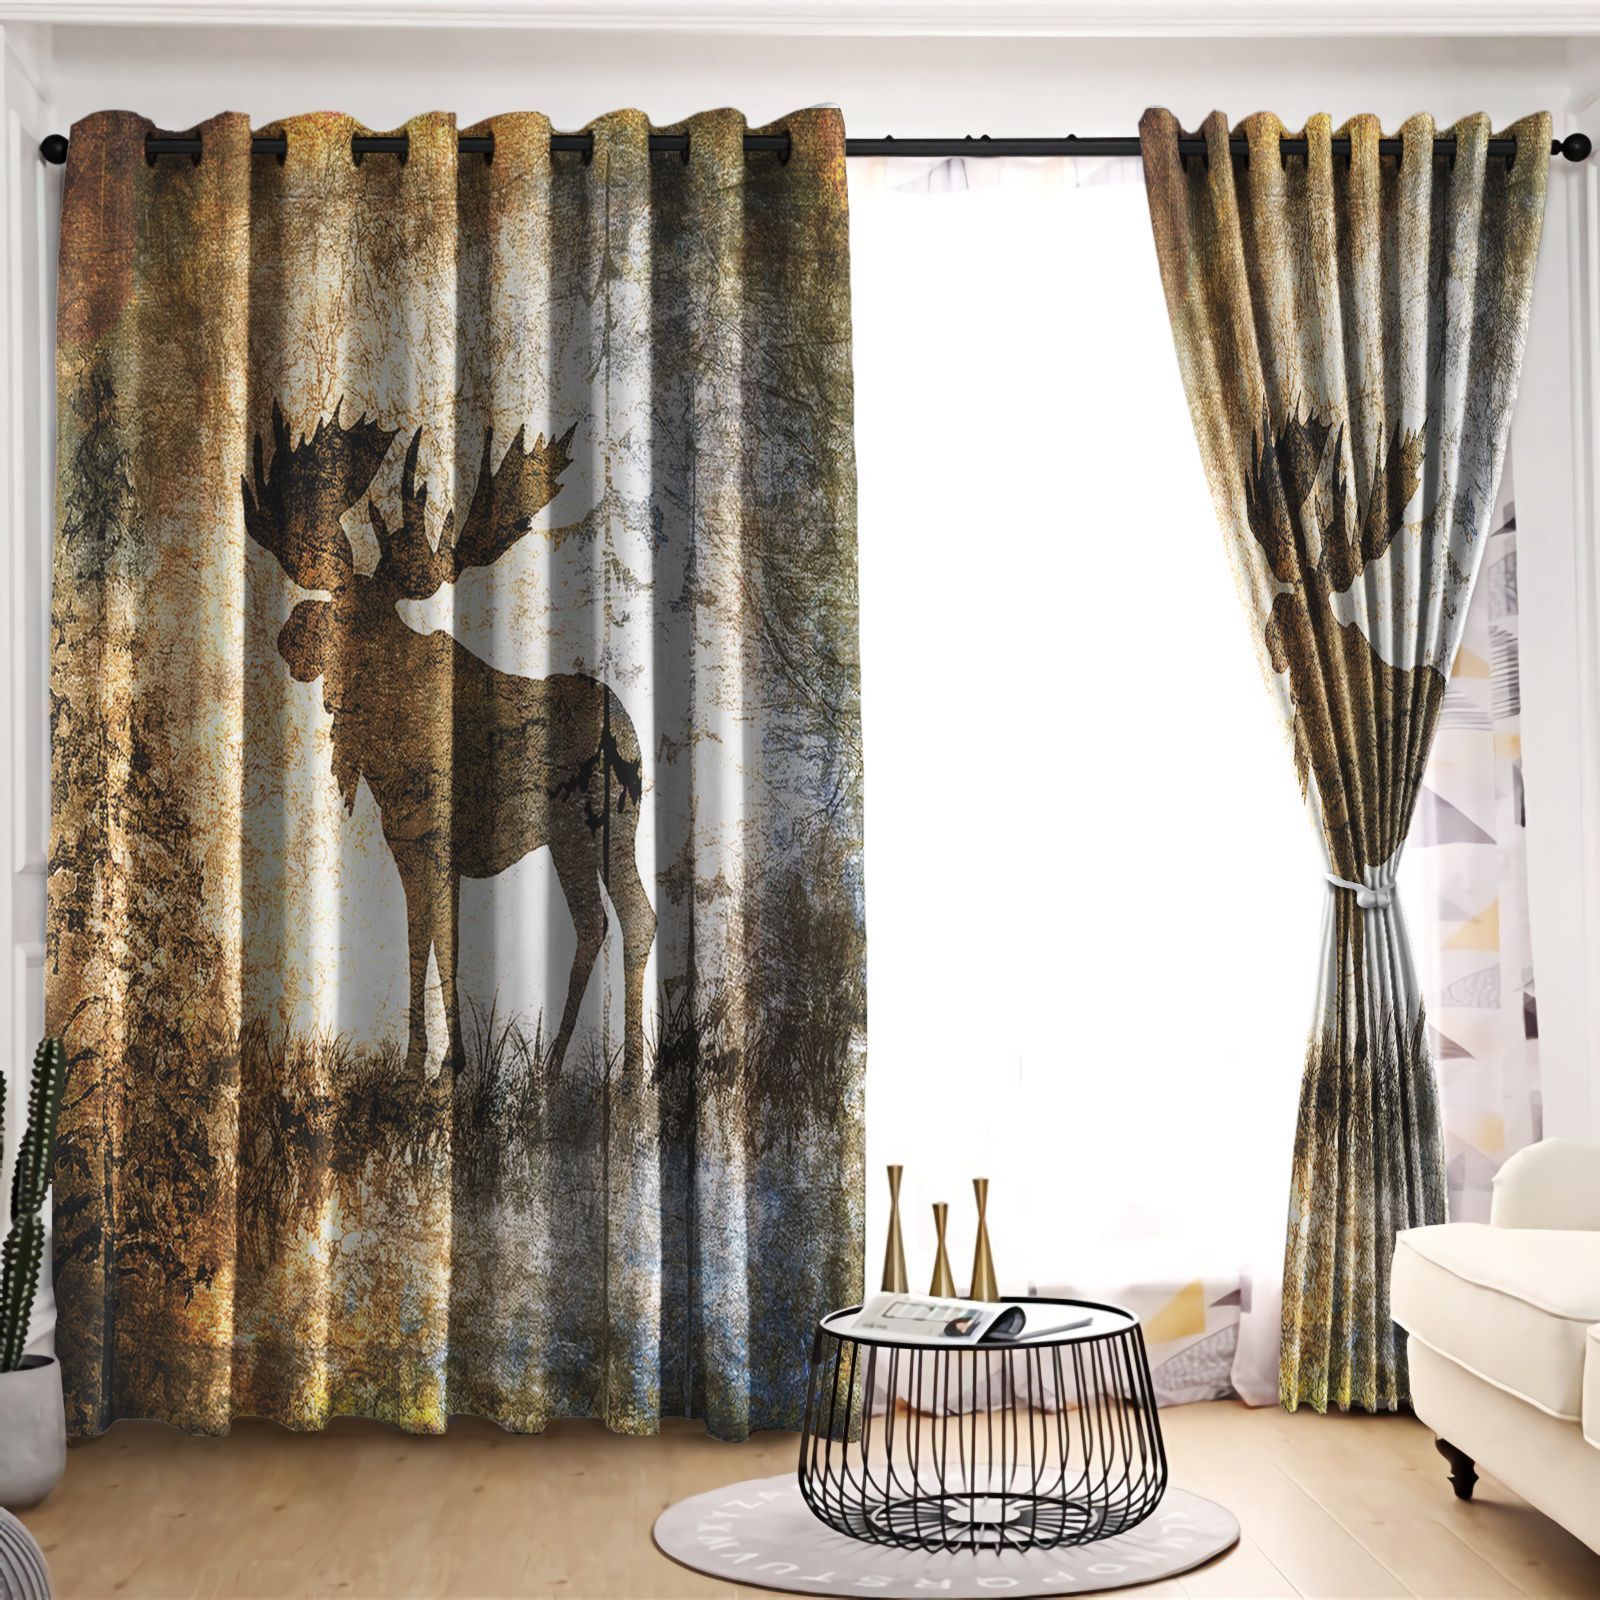 Moose Brown And White Printed Window Curtain Home Decor